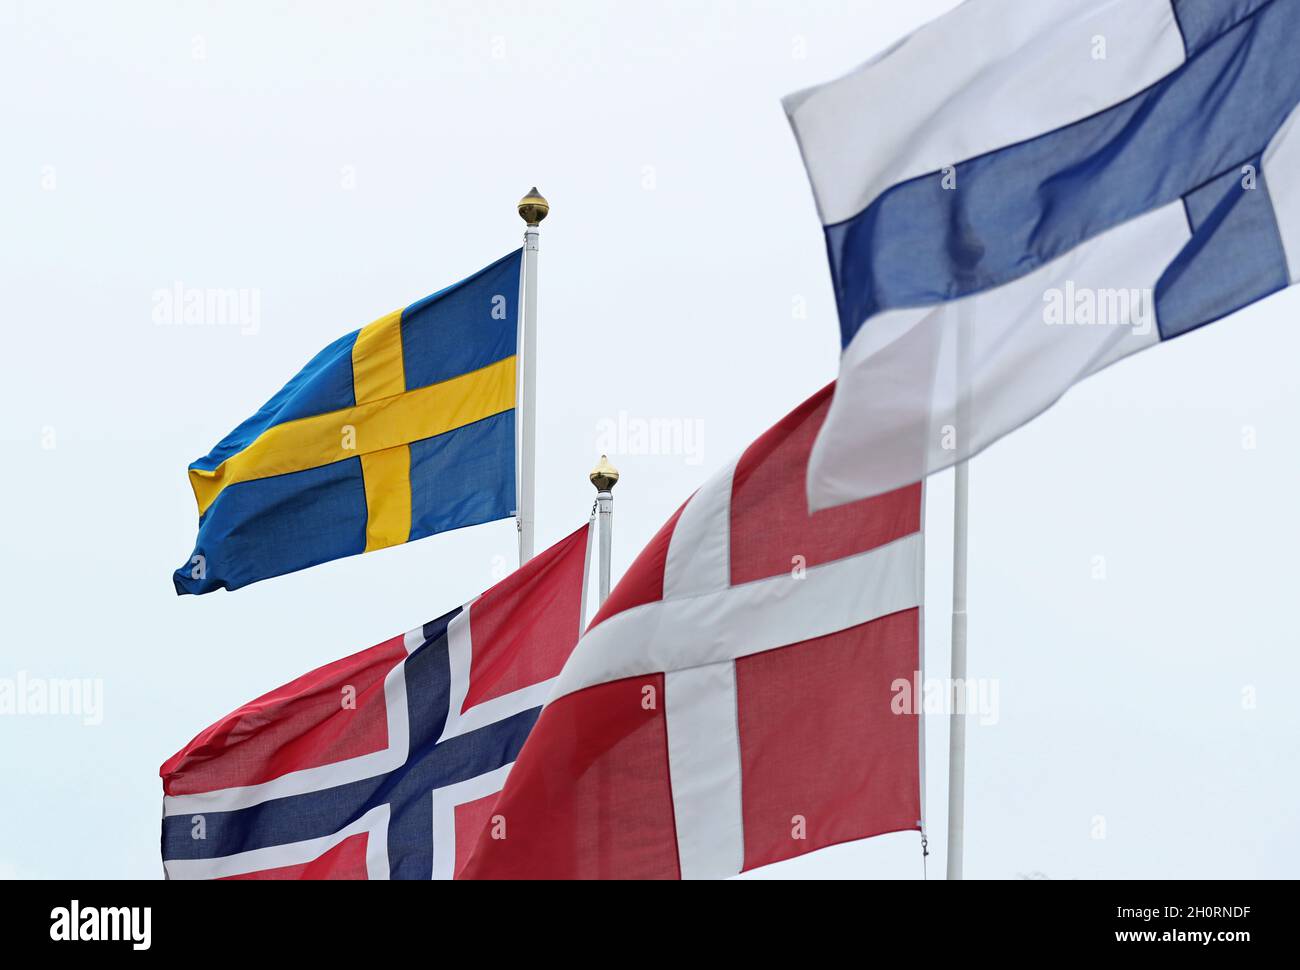 Nordic flags (Swedish flag, the Norwegian flag, the Danish flag and the Finnish flag in the foreground) in Stockholm, Sweden, during Sunday afternoon. Stock Photo